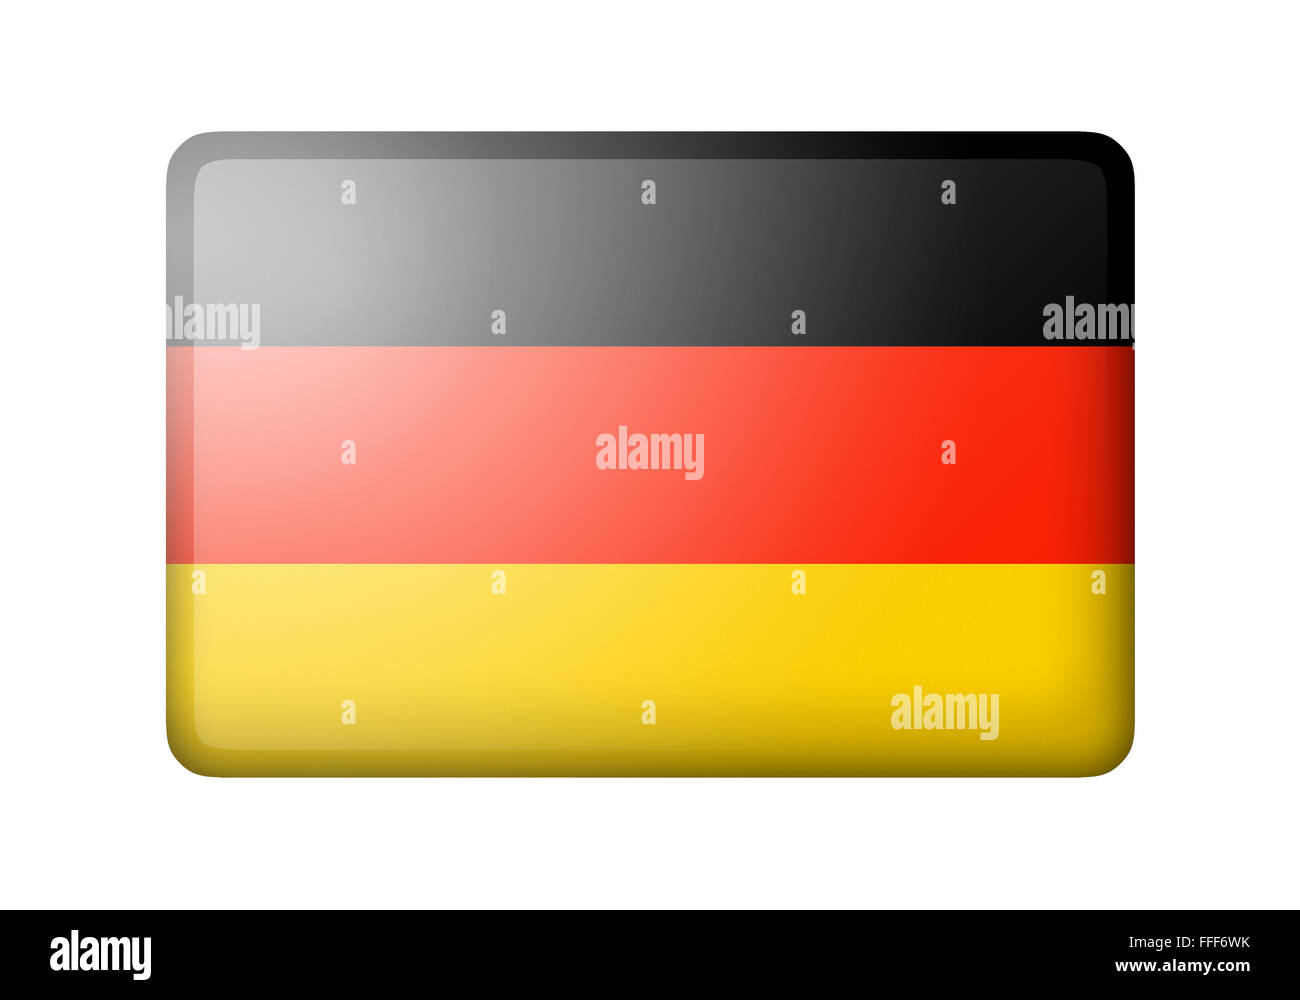 File:Deutschlandflagge.png - Wikimedia Commons